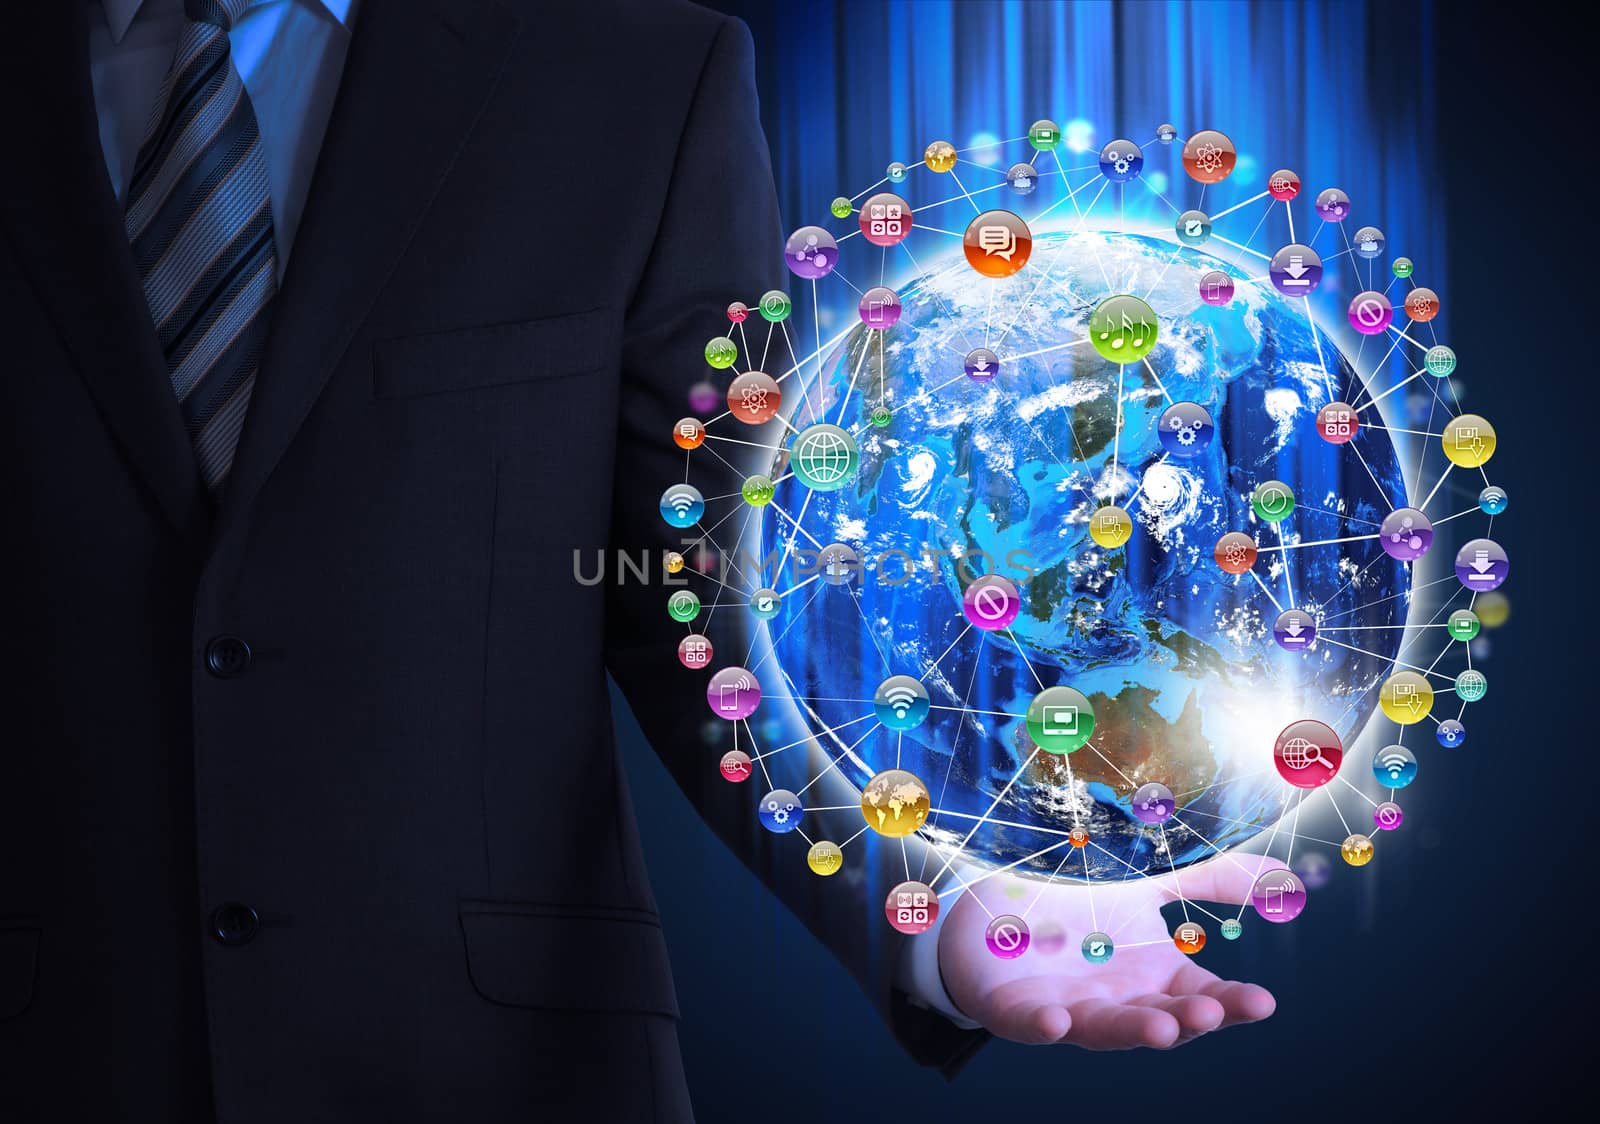 Man in suit holding a earth in hand by cherezoff